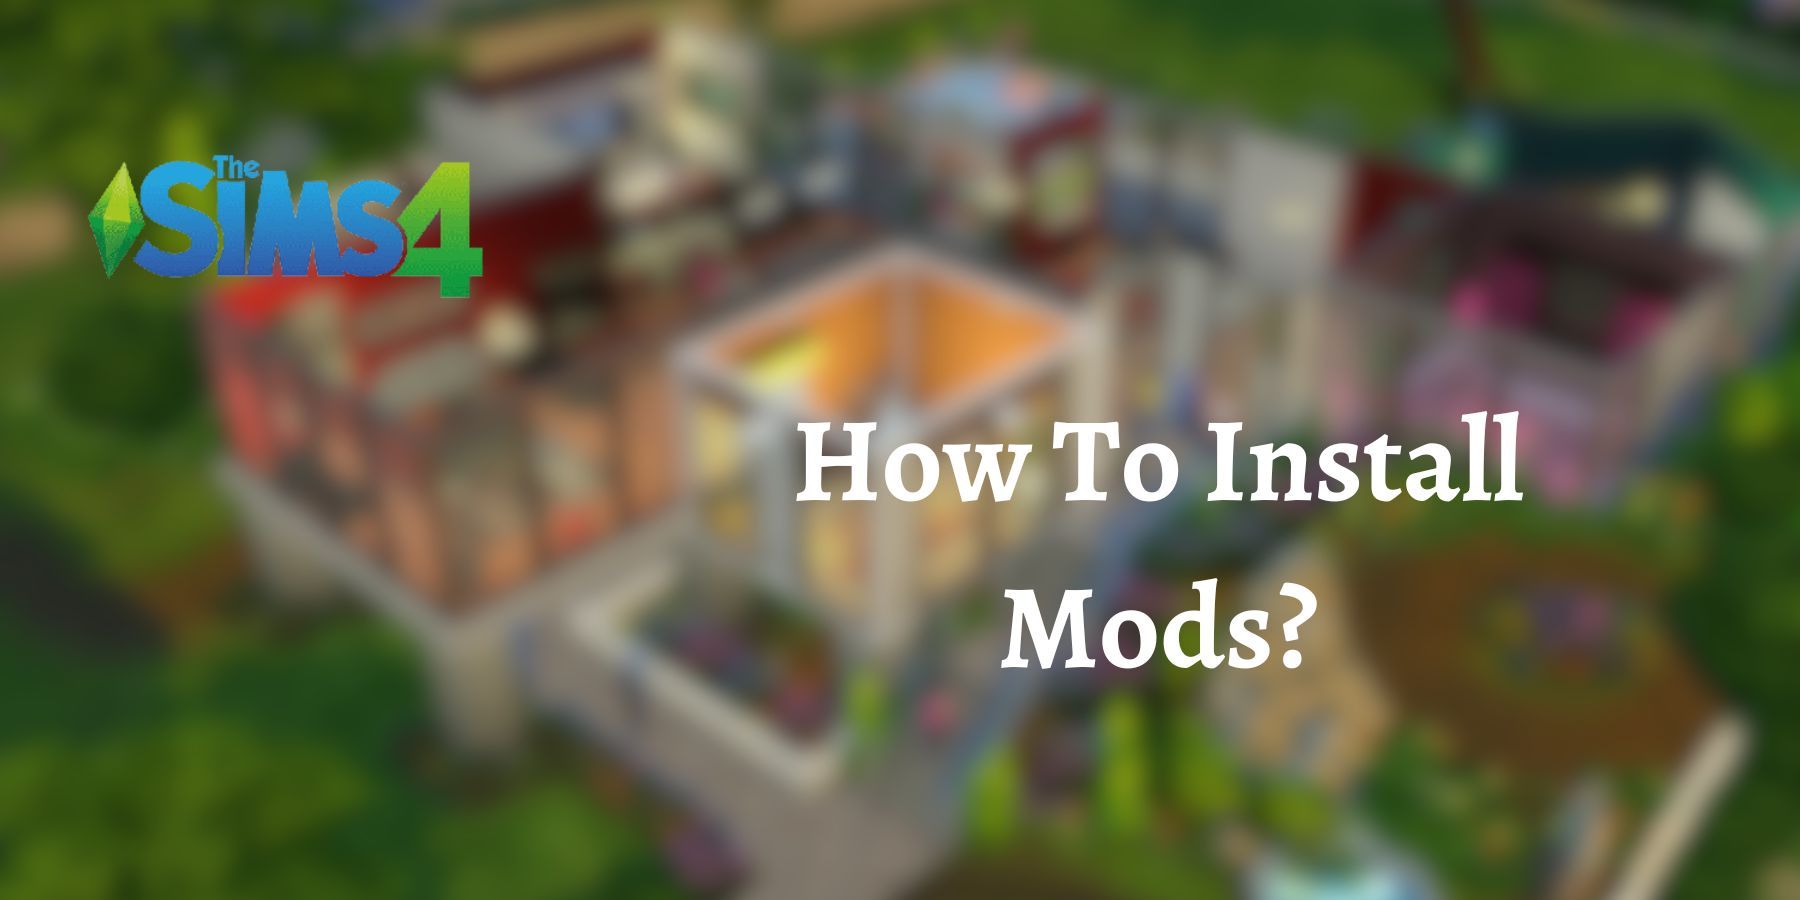 Mod The Sims - Home for All Seasons (CC Free)